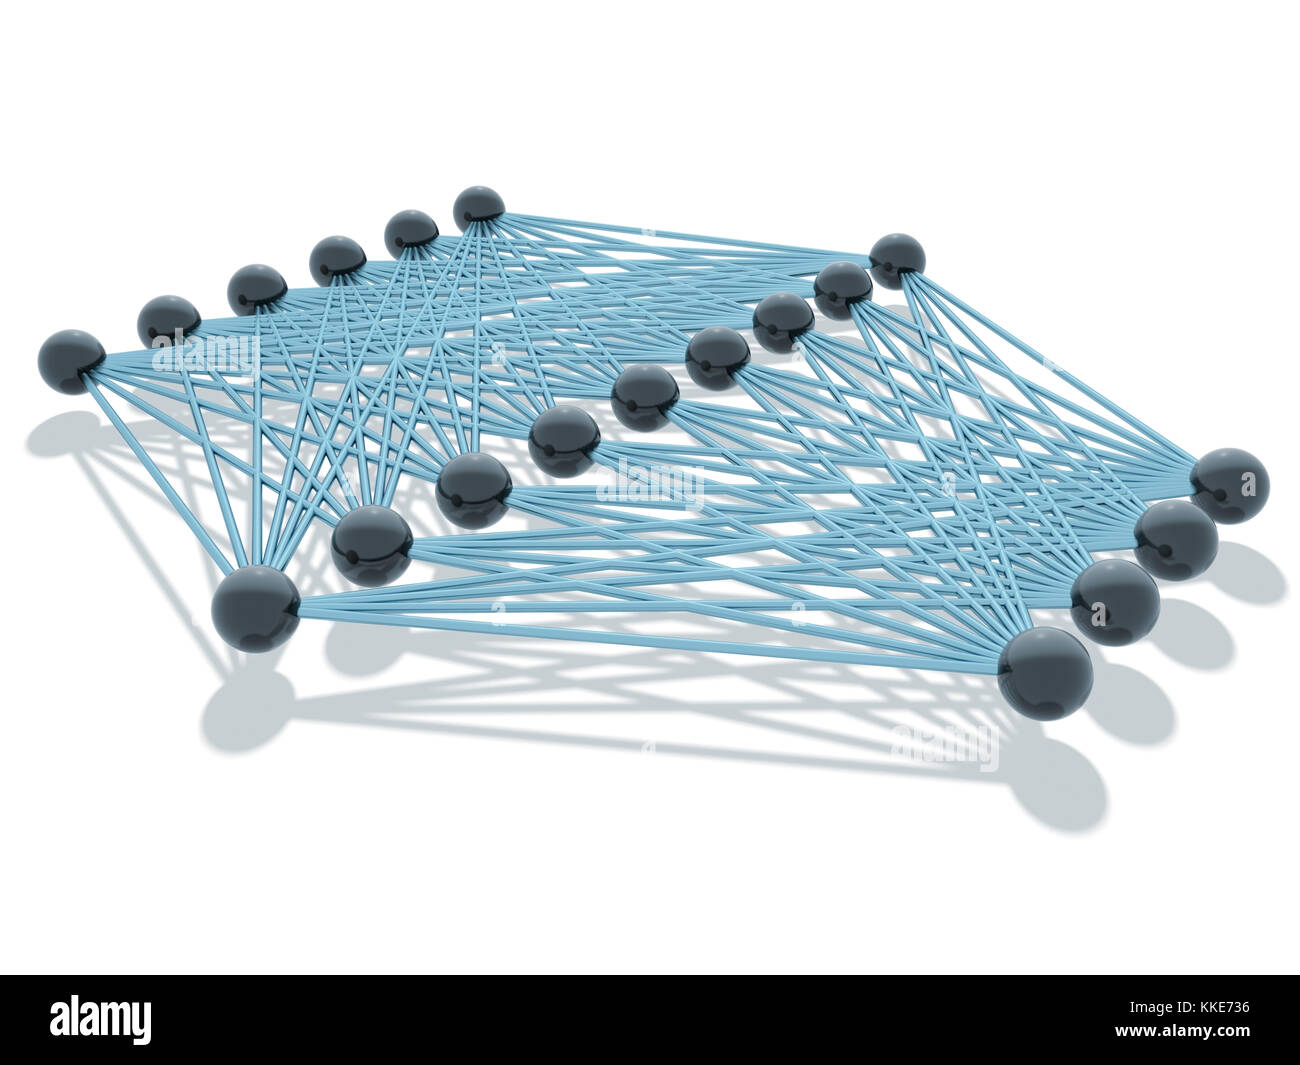 Artificial neural network structure model isolated on white, 3d render Stock Photo